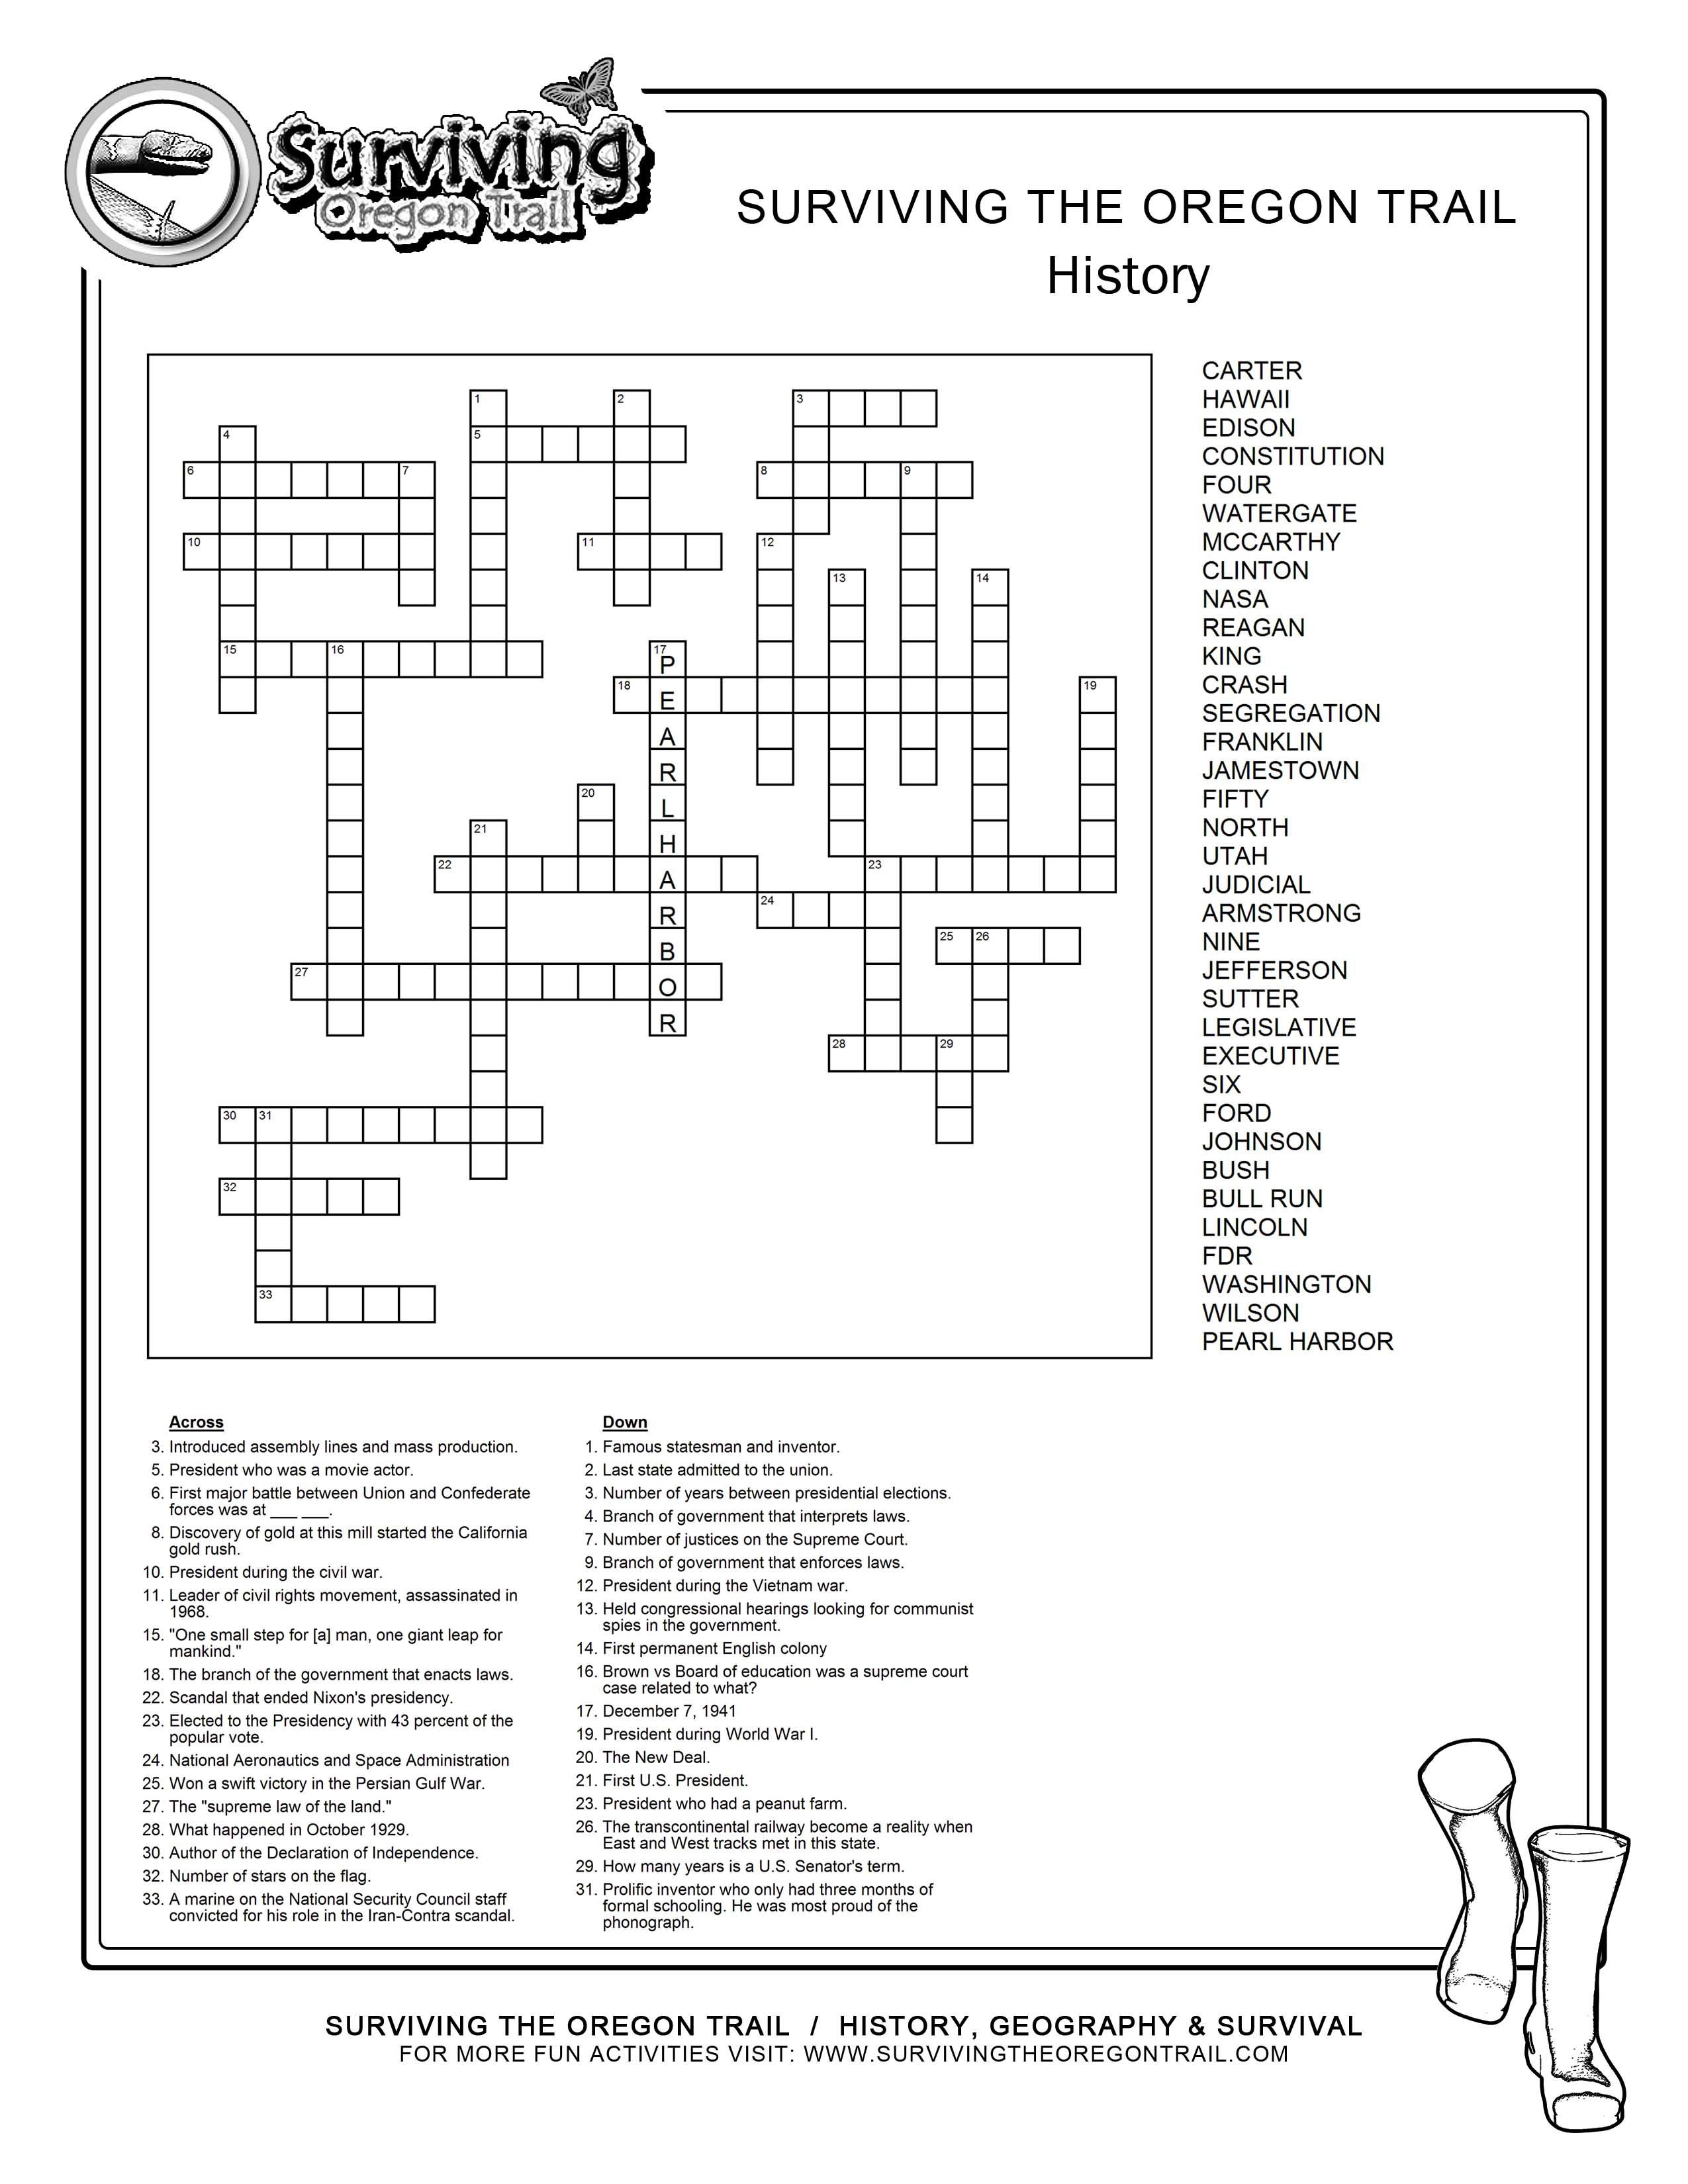 Fill Free To Save This Historical Crossword Puzzle To Your Computer - Printable Us History Crossword Puzzles